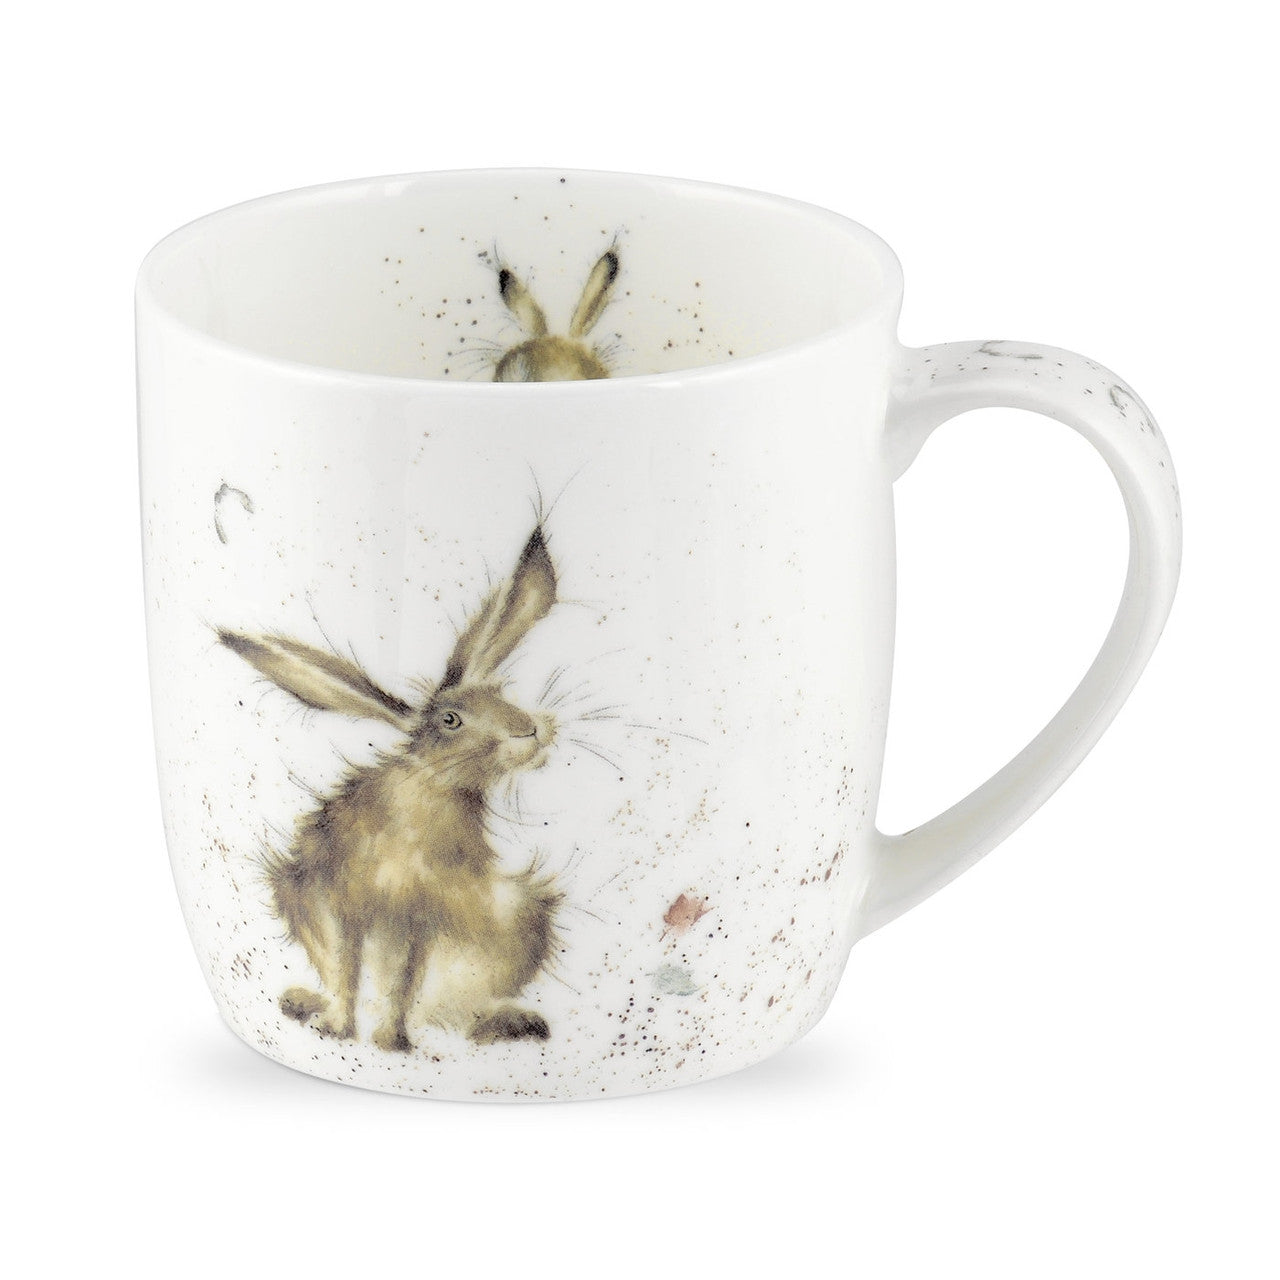 'Good Hare Day' Bone China Mug from Wrendale Designs by Royal Worcester.